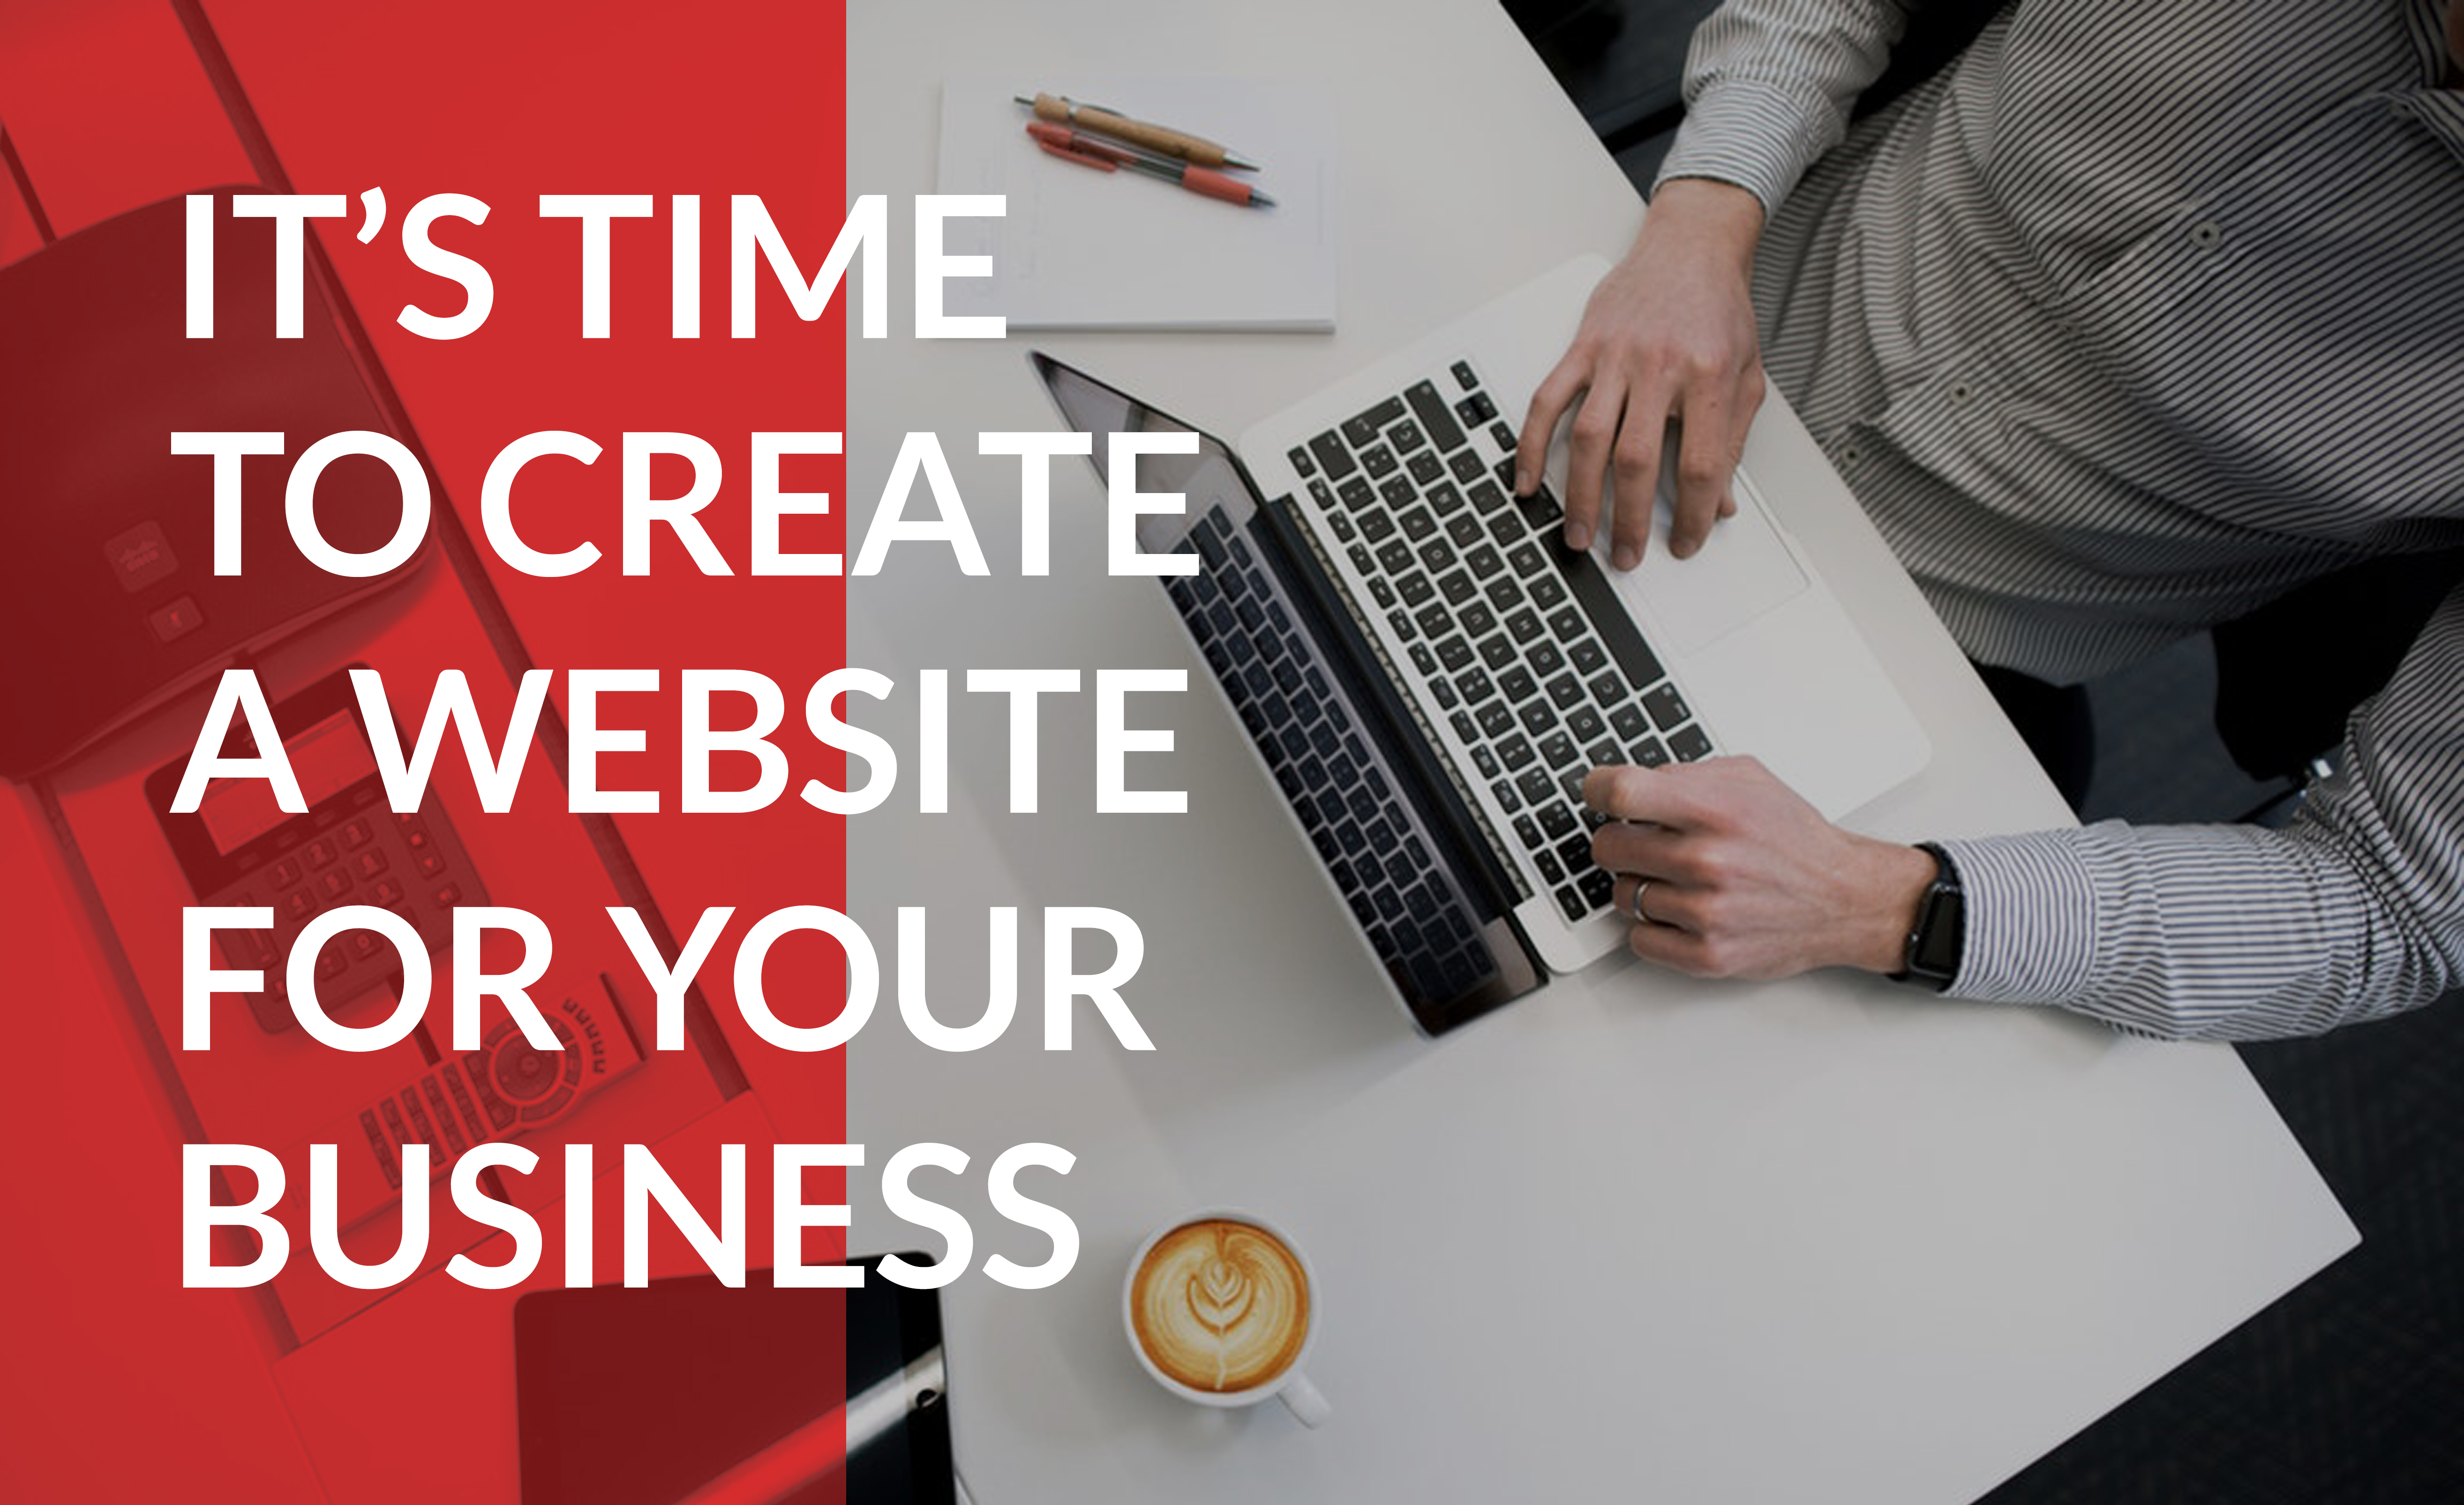 Use tools like WordPress and Domain.com to get your business online today.